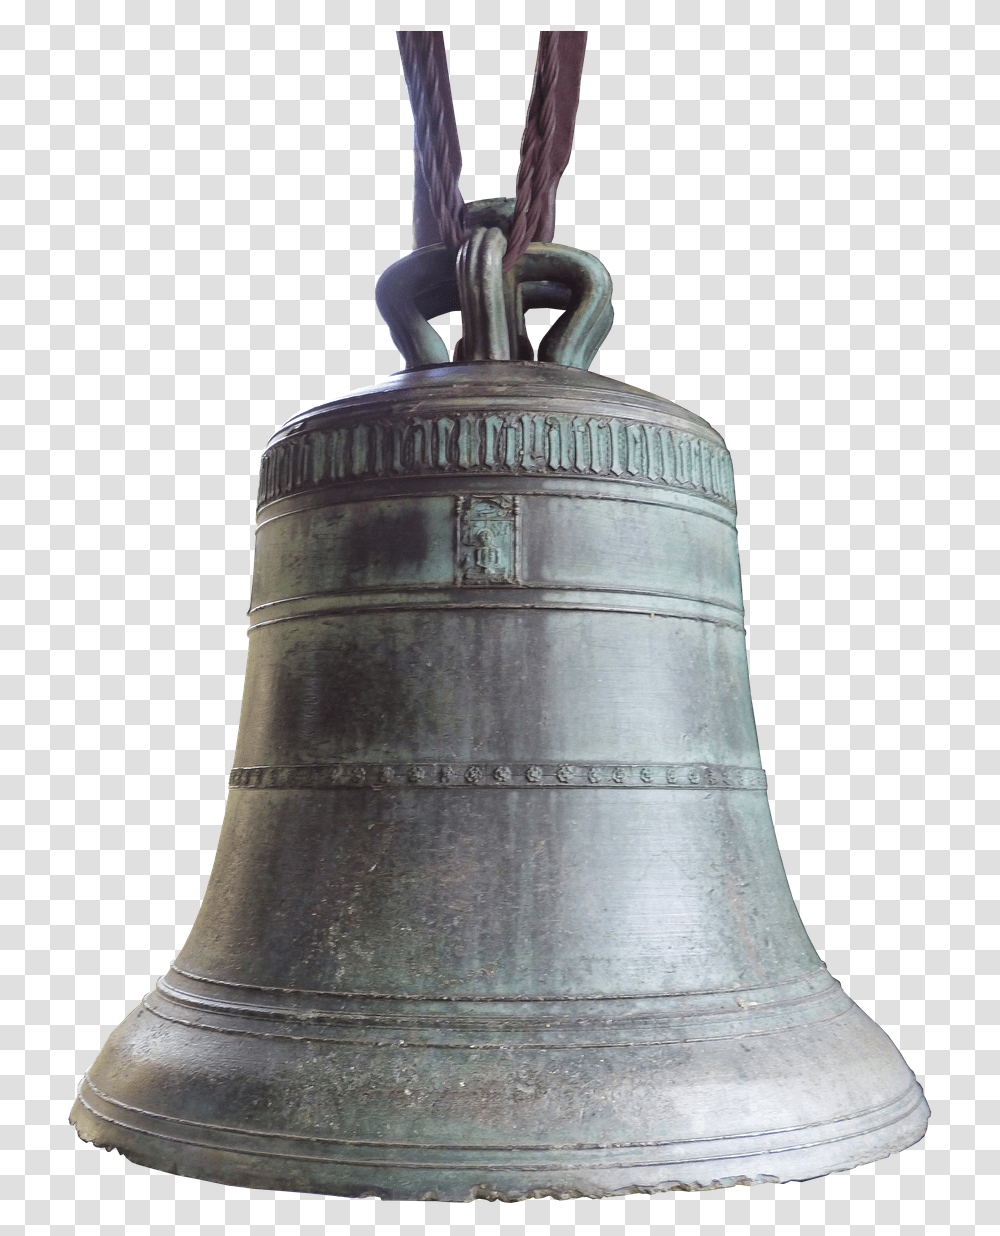 Bell Bronze Old Ring Close Up Decorated Church Bell Ringing Hd, Musical Instrument, Chime, Windchime Transparent Png